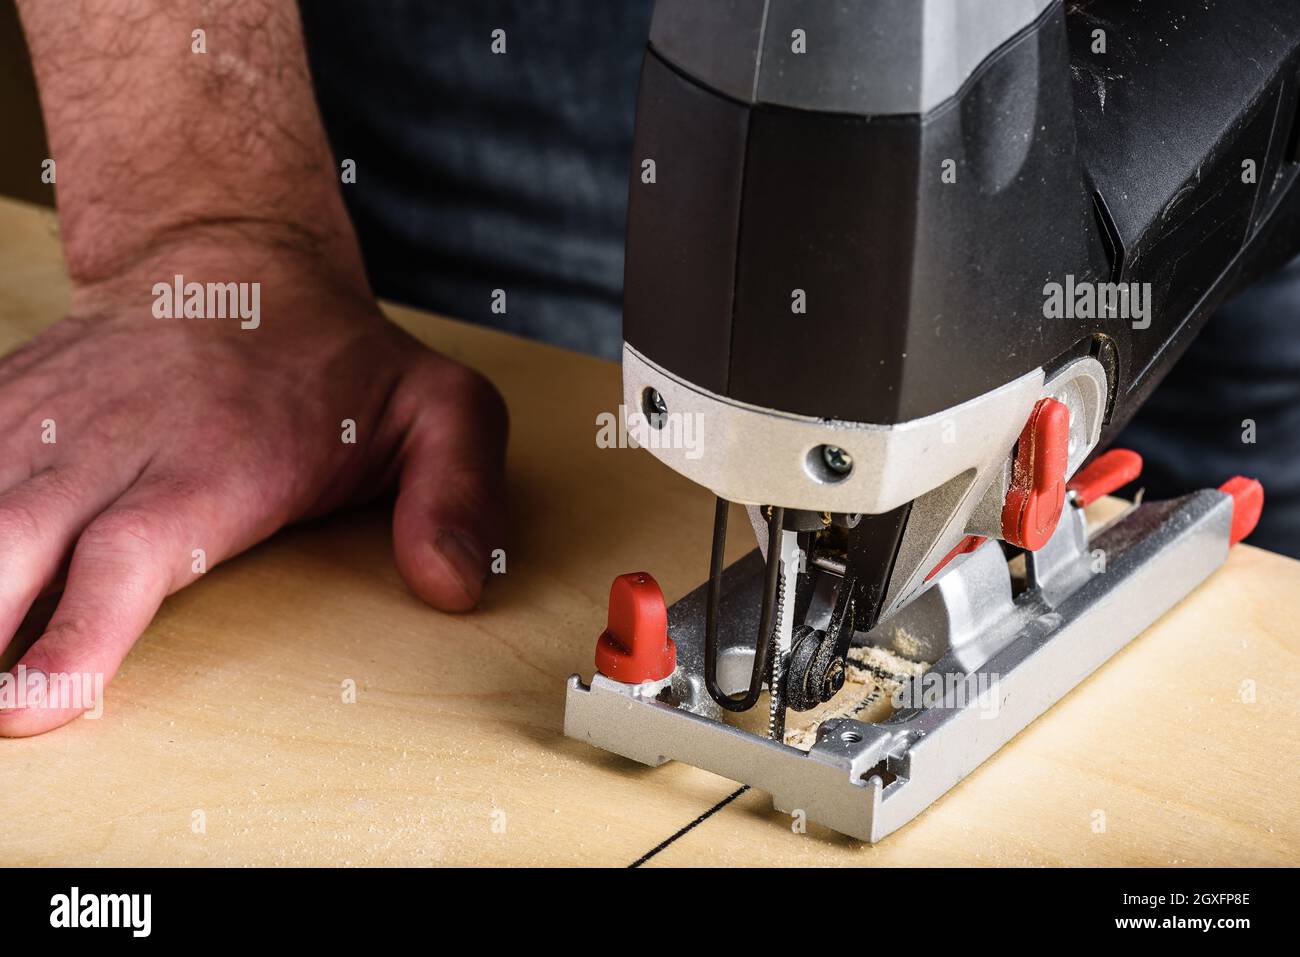 Man with electric jig saw cutting plywood Stock Photo